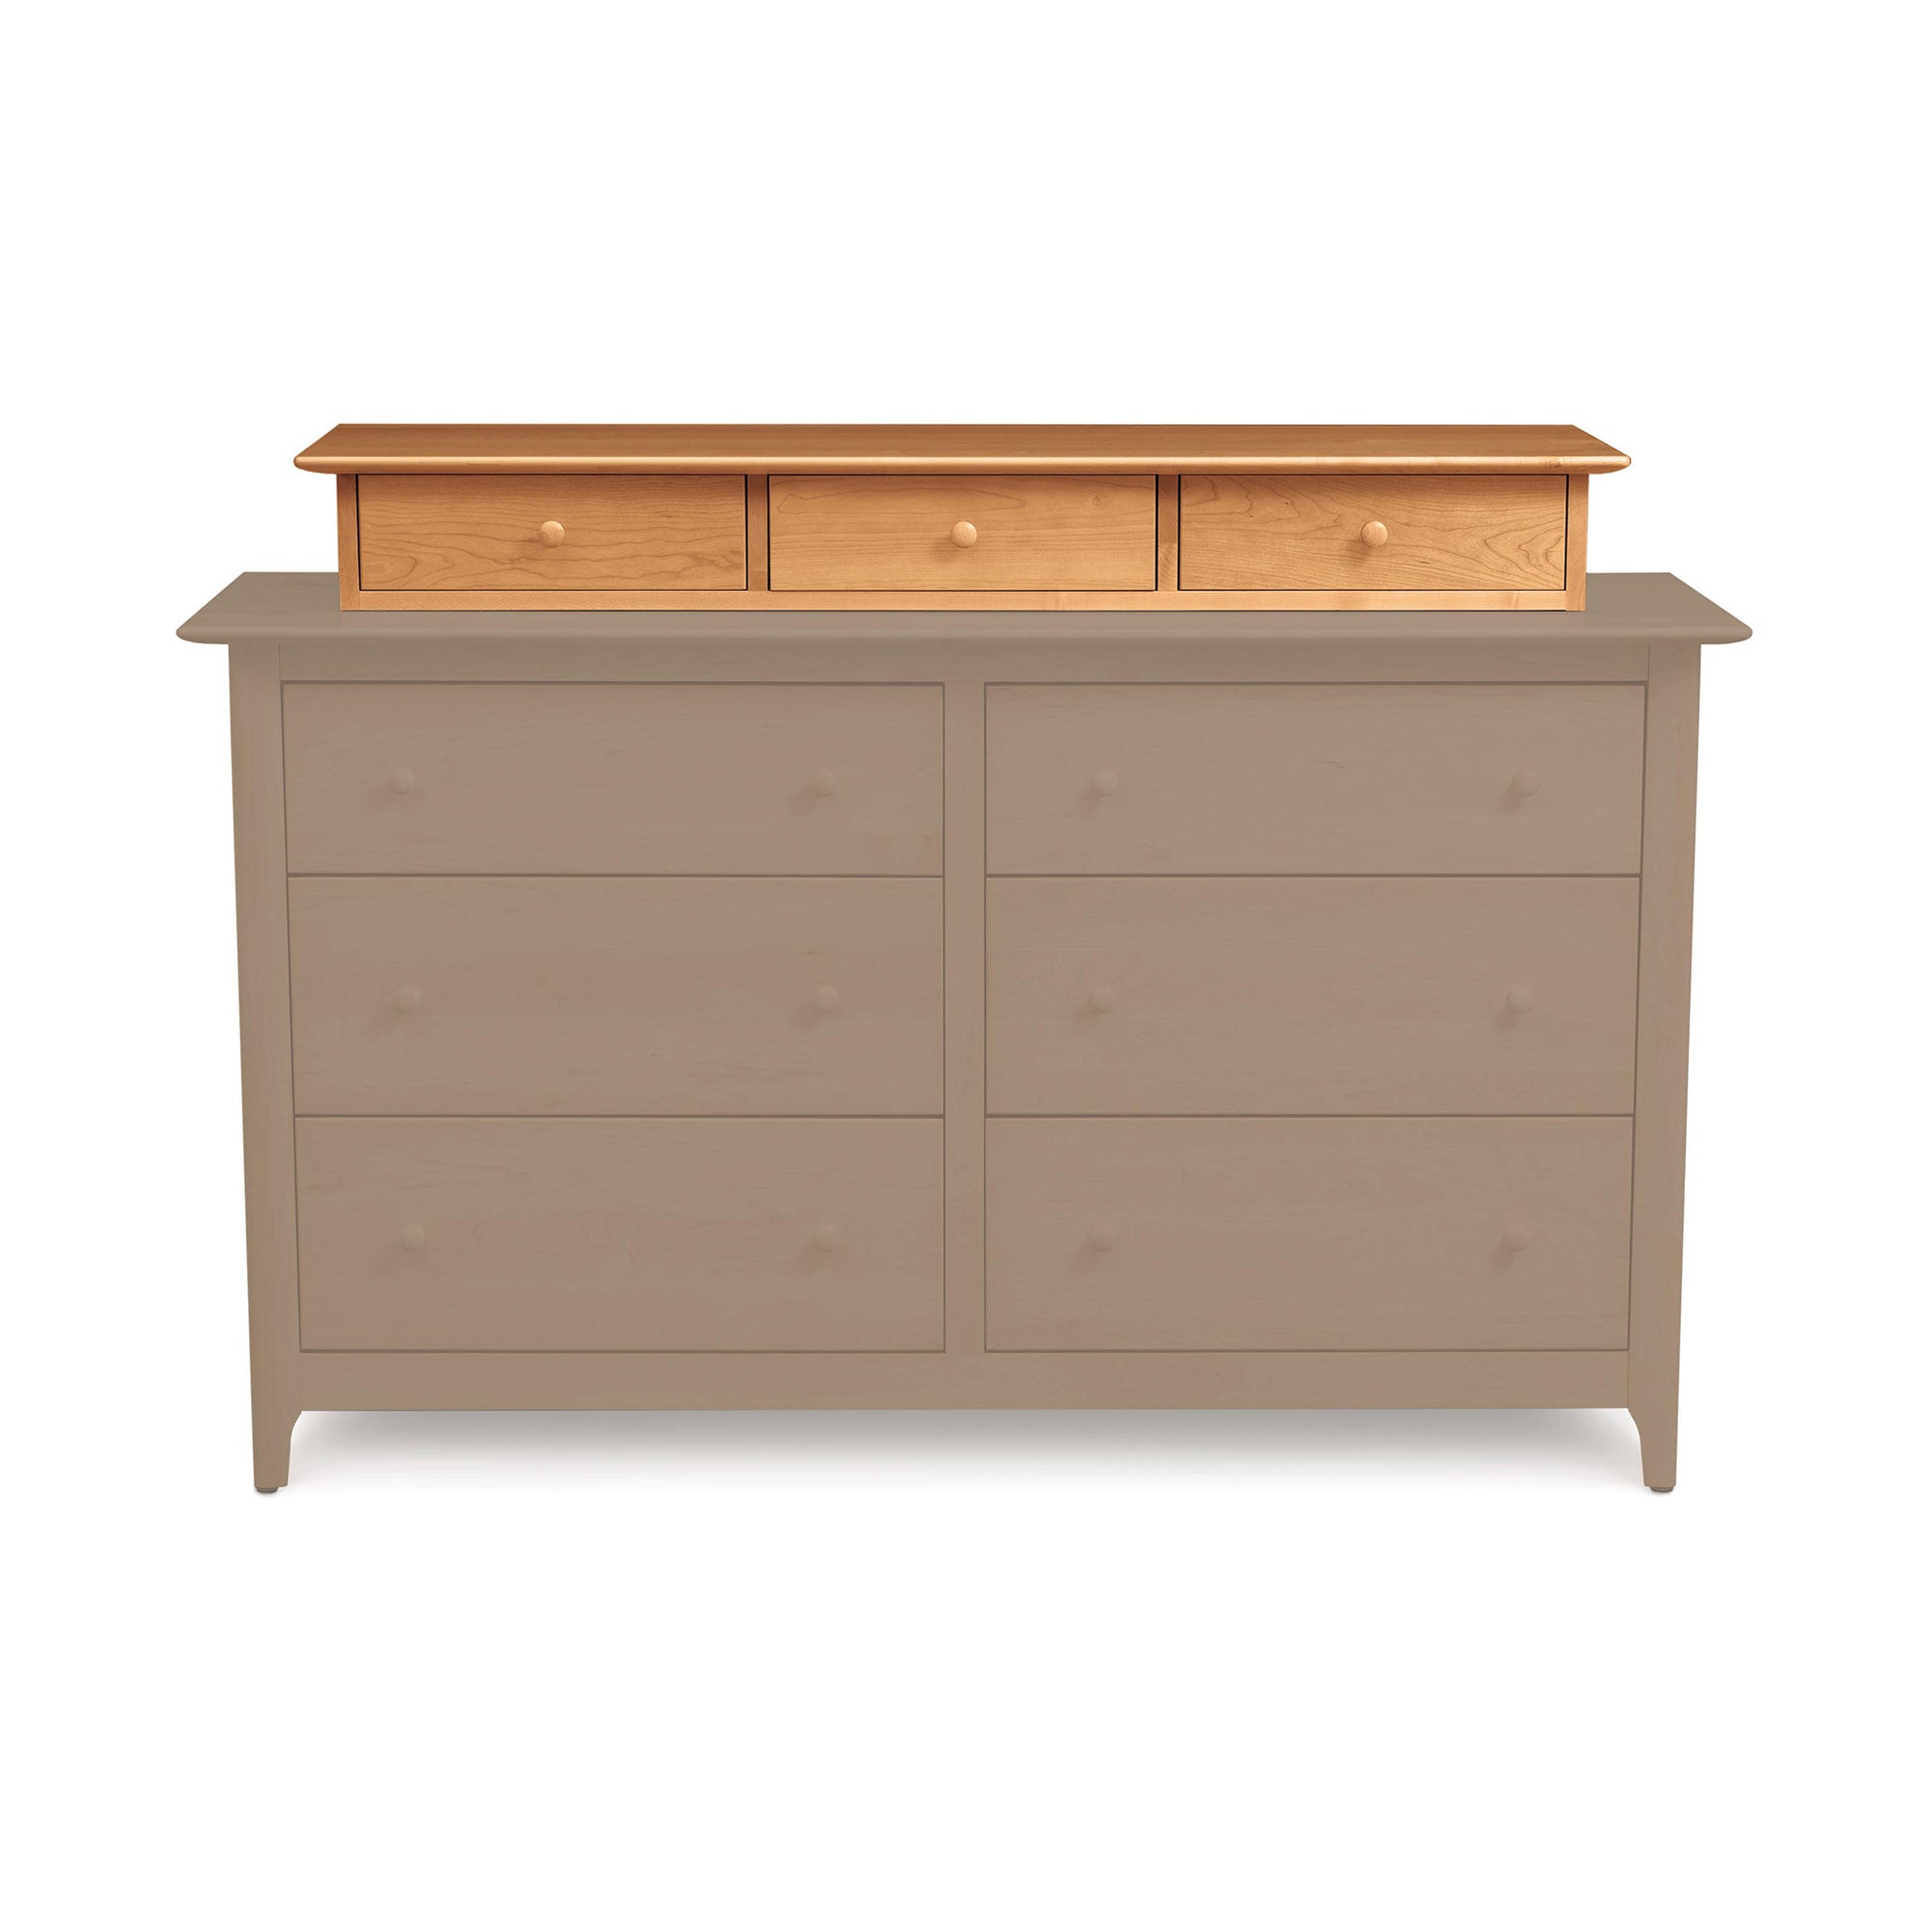 An eco-friendly cherry wood Copeland Furniture Sarah Accessory Case, featuring three smaller drawers on the top row and three larger drawers below, perfect as a jewelry storage case.